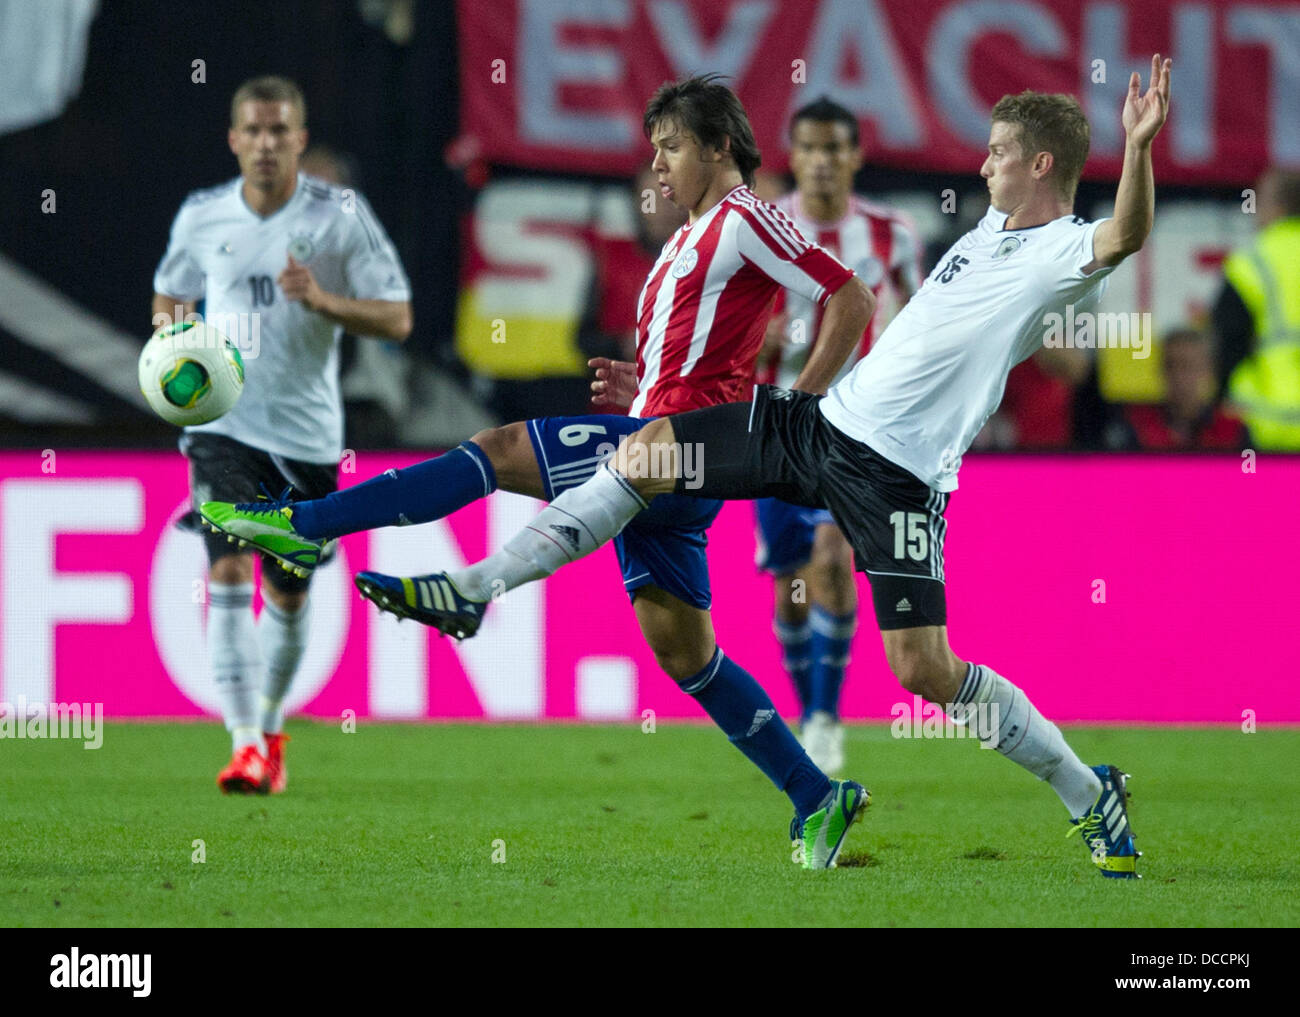 Kaiserslautern, Germany. 14th Aug, 2013. Germany's Lars Bender (R) and Paraguay's Oscar Romero vie for the ball during the international friendly soccer match between Germany vs Paraguay at the Fritz-Walter-Stadium in Kaiserslautern, Germany, 14 August 2013. On the left side of the picture Germany's Mats Hummels. Photo: Uwe Anspach/dpa/Alamy Live News Stock Photo